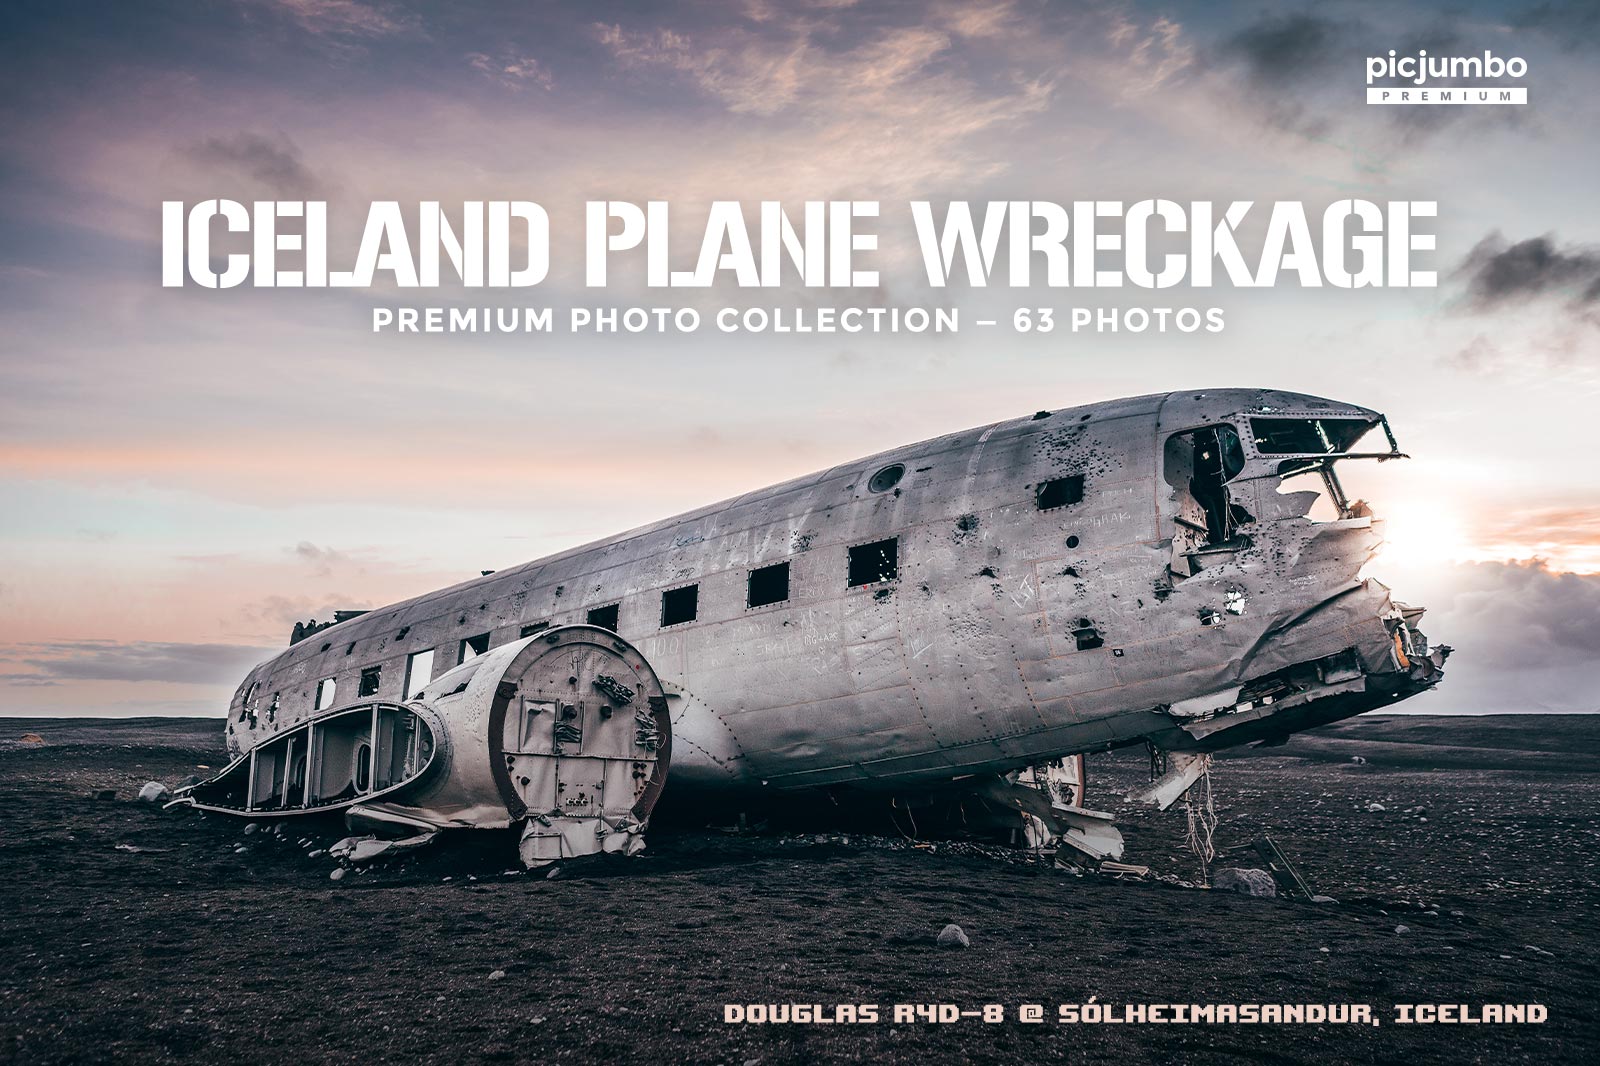 Download hi-res stock photos from our Iceland Plane Wreckage PREMIUM Collection!